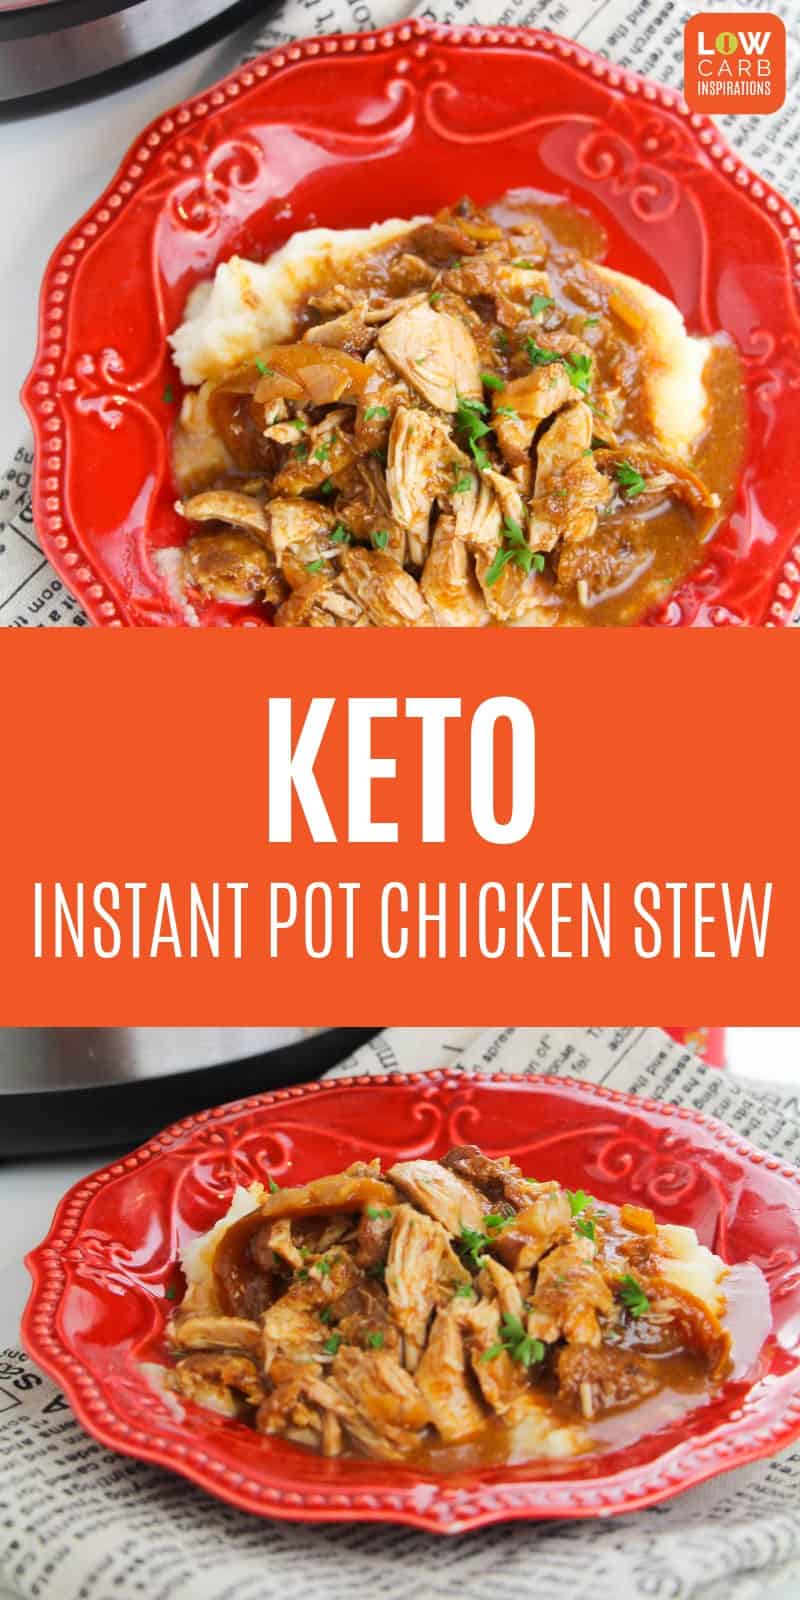 This instant pot chicken stew recipe is hearty & healthy for a chilly evening. You can have this amazing instant pot recipe ready in 30 minutes or less too!